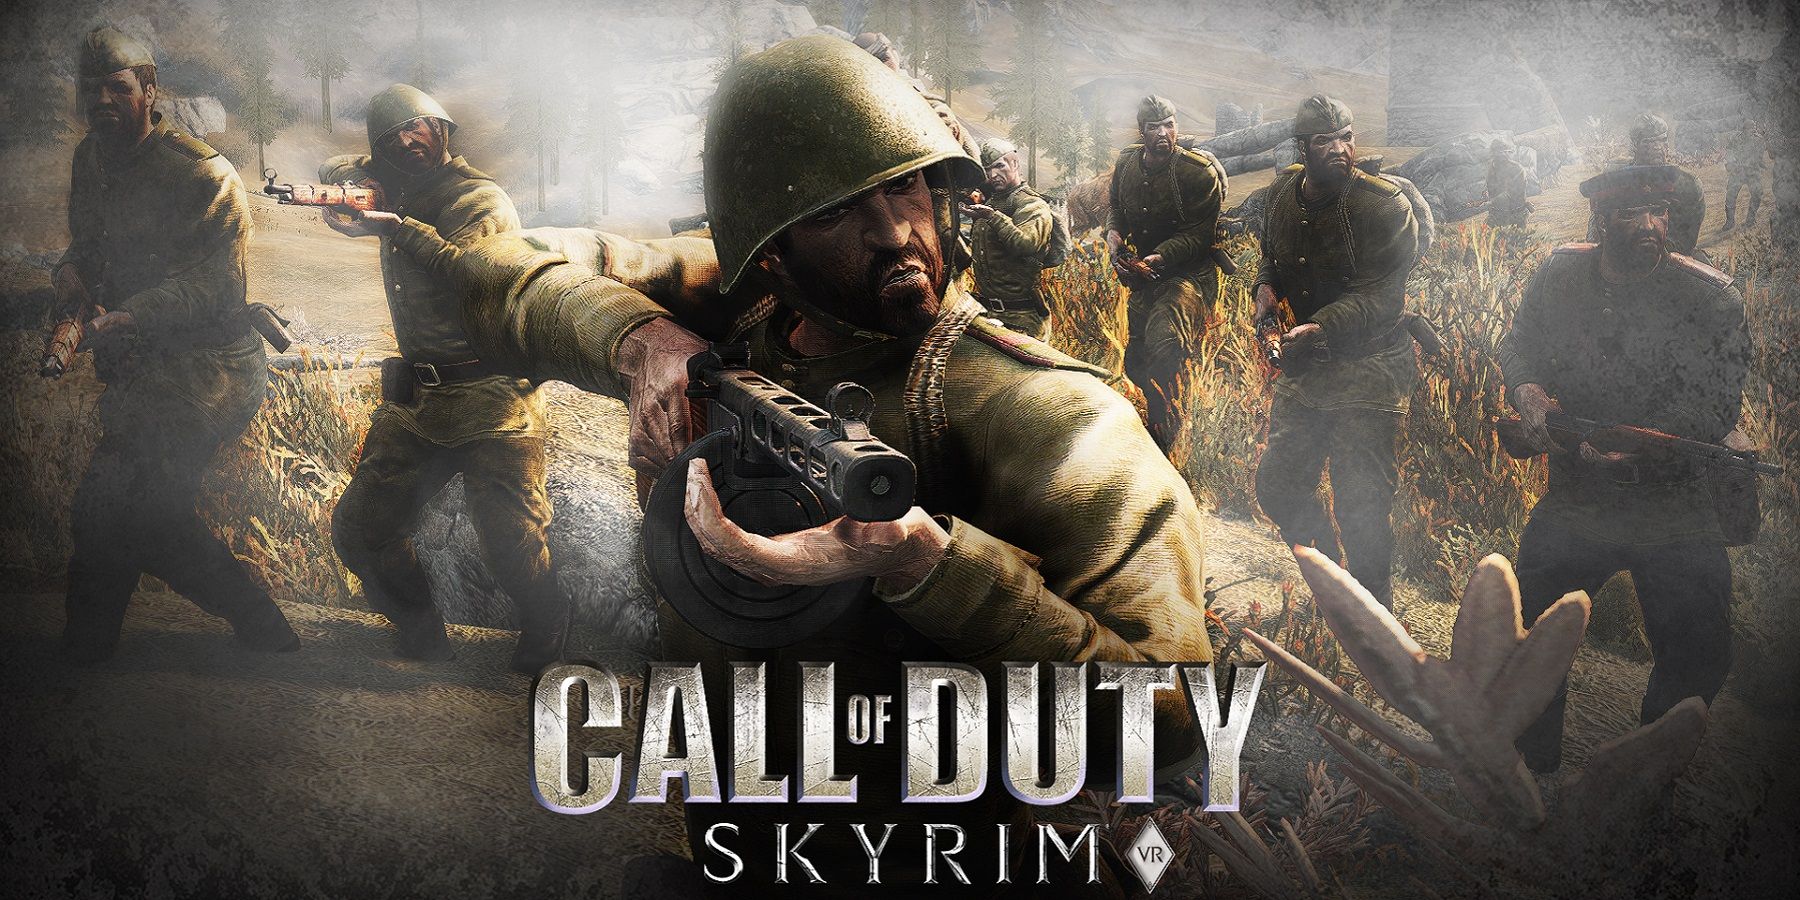 Call of Duty image showing a bunch of soldiers with the Skyrim VR logo at the bottom.